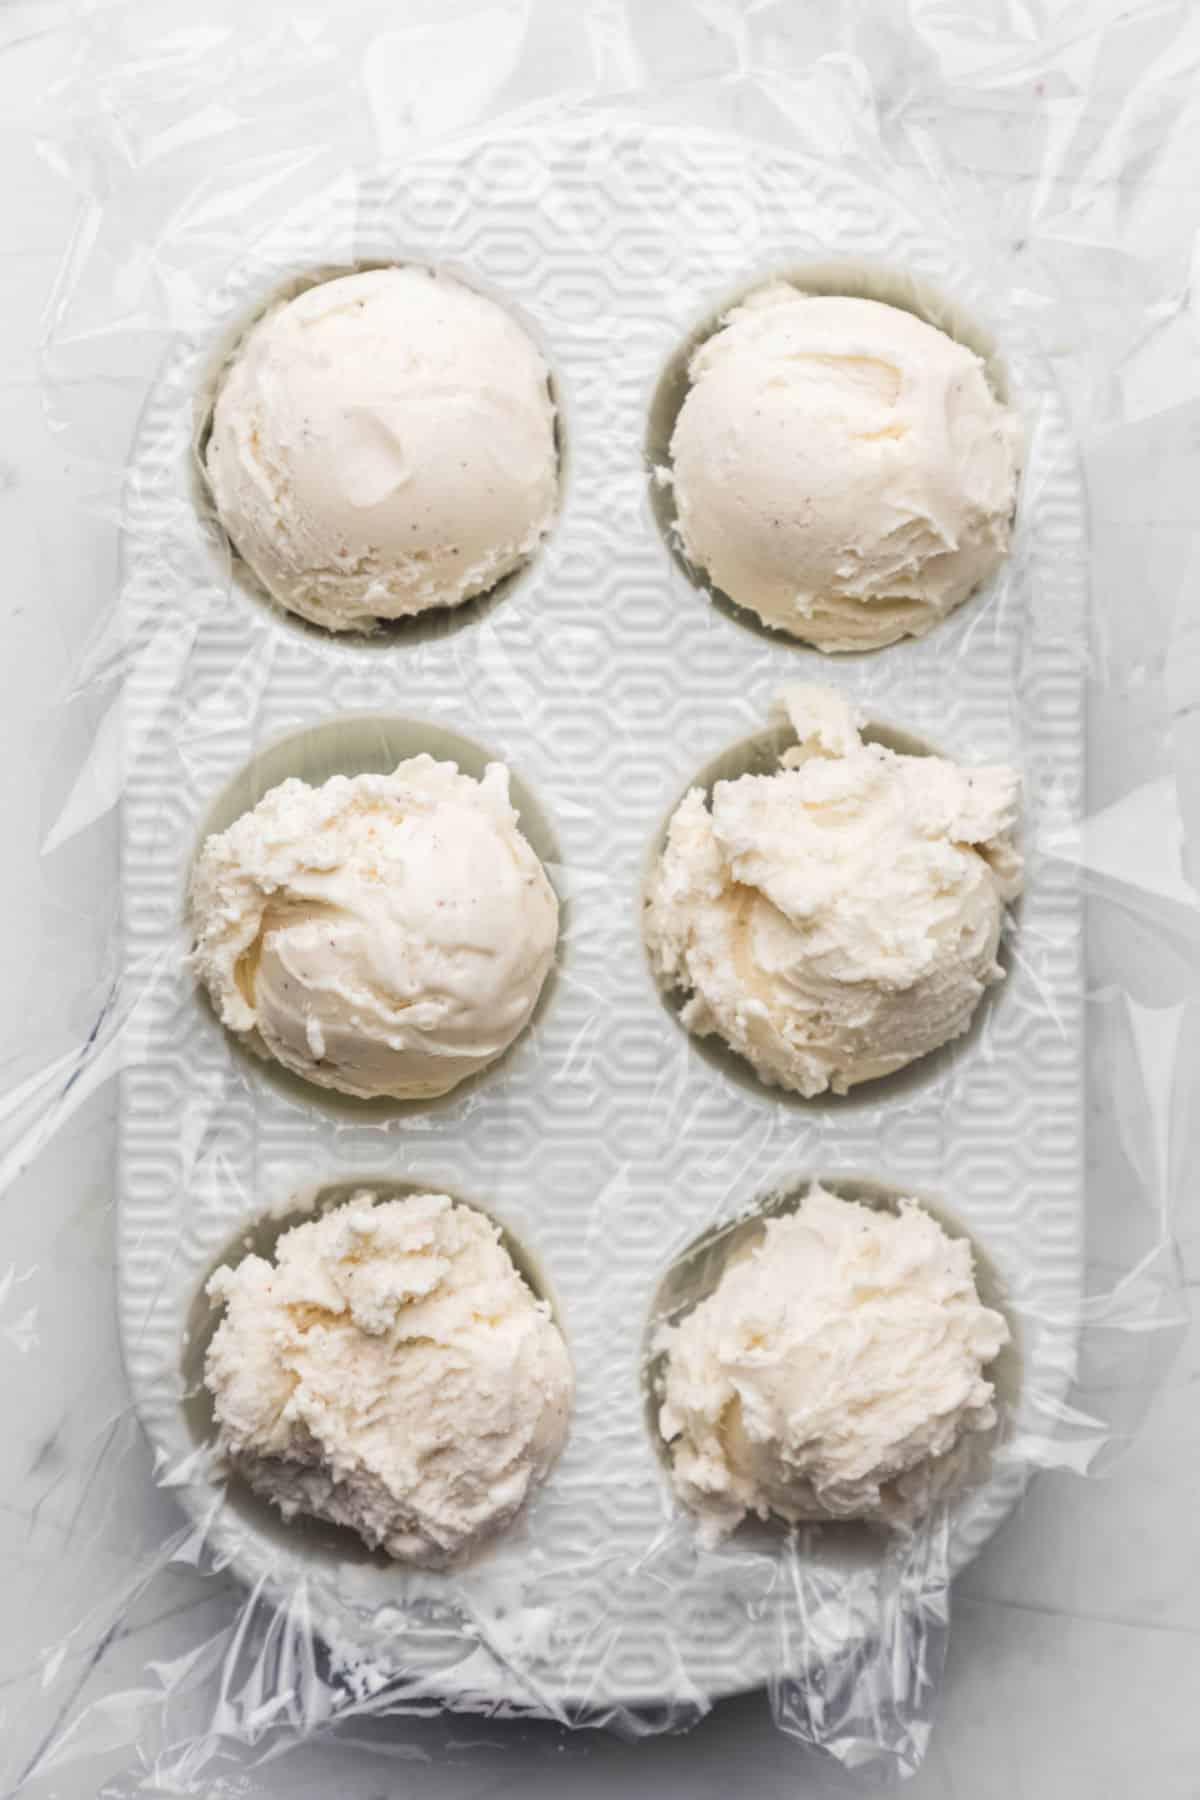 Six scoops of vanilla ice cream in a muffin pan.